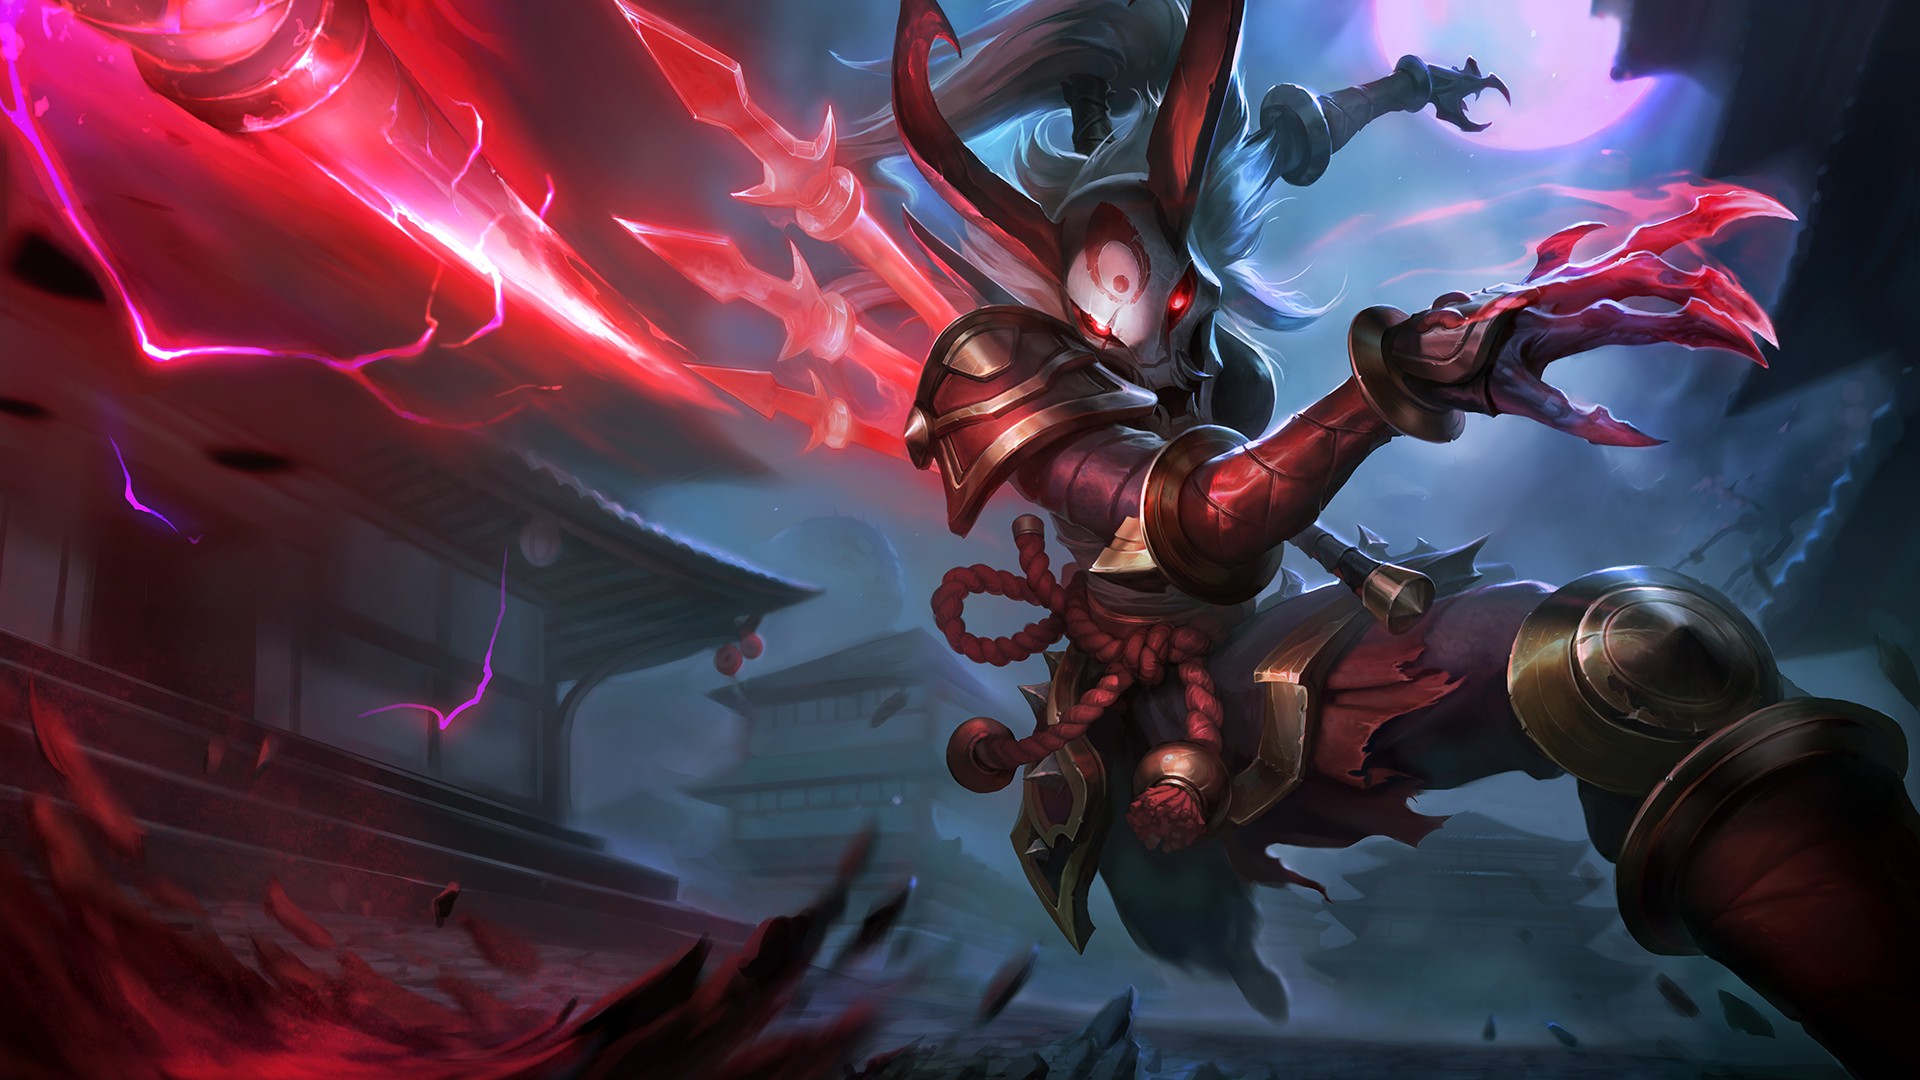 General 1920x1080 Kalista (League of Legends) PC gaming red eyes fantasy art